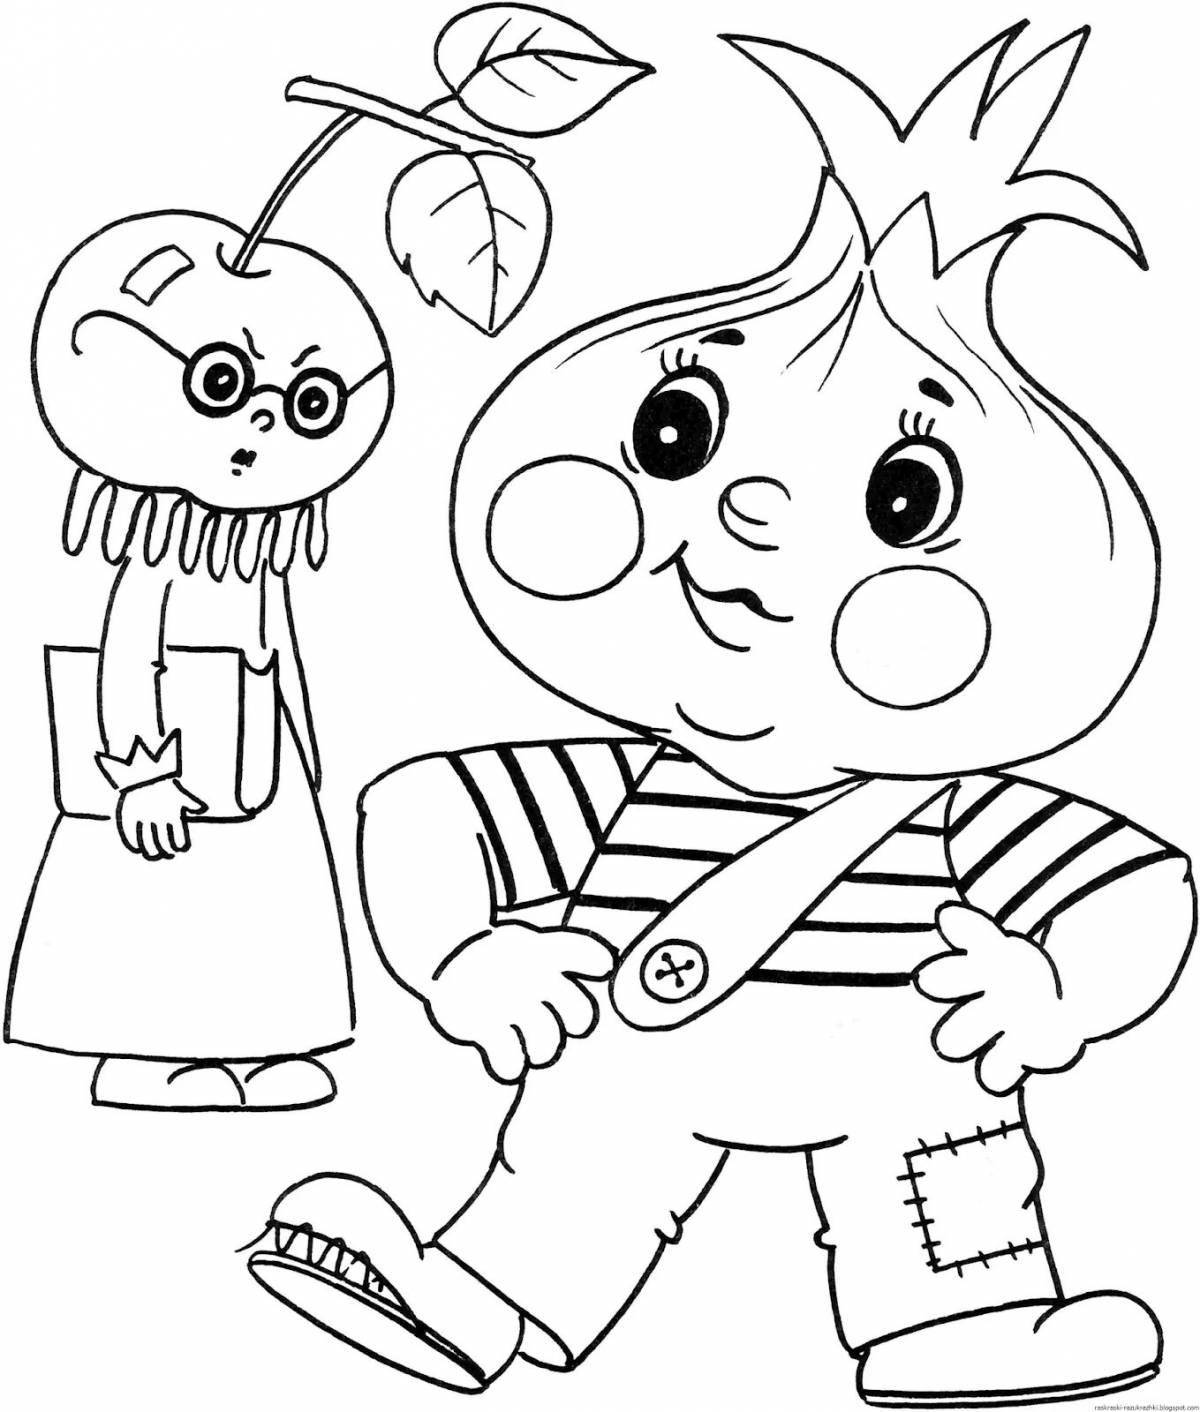 Colorful fairy tale characters coloring page for little ones